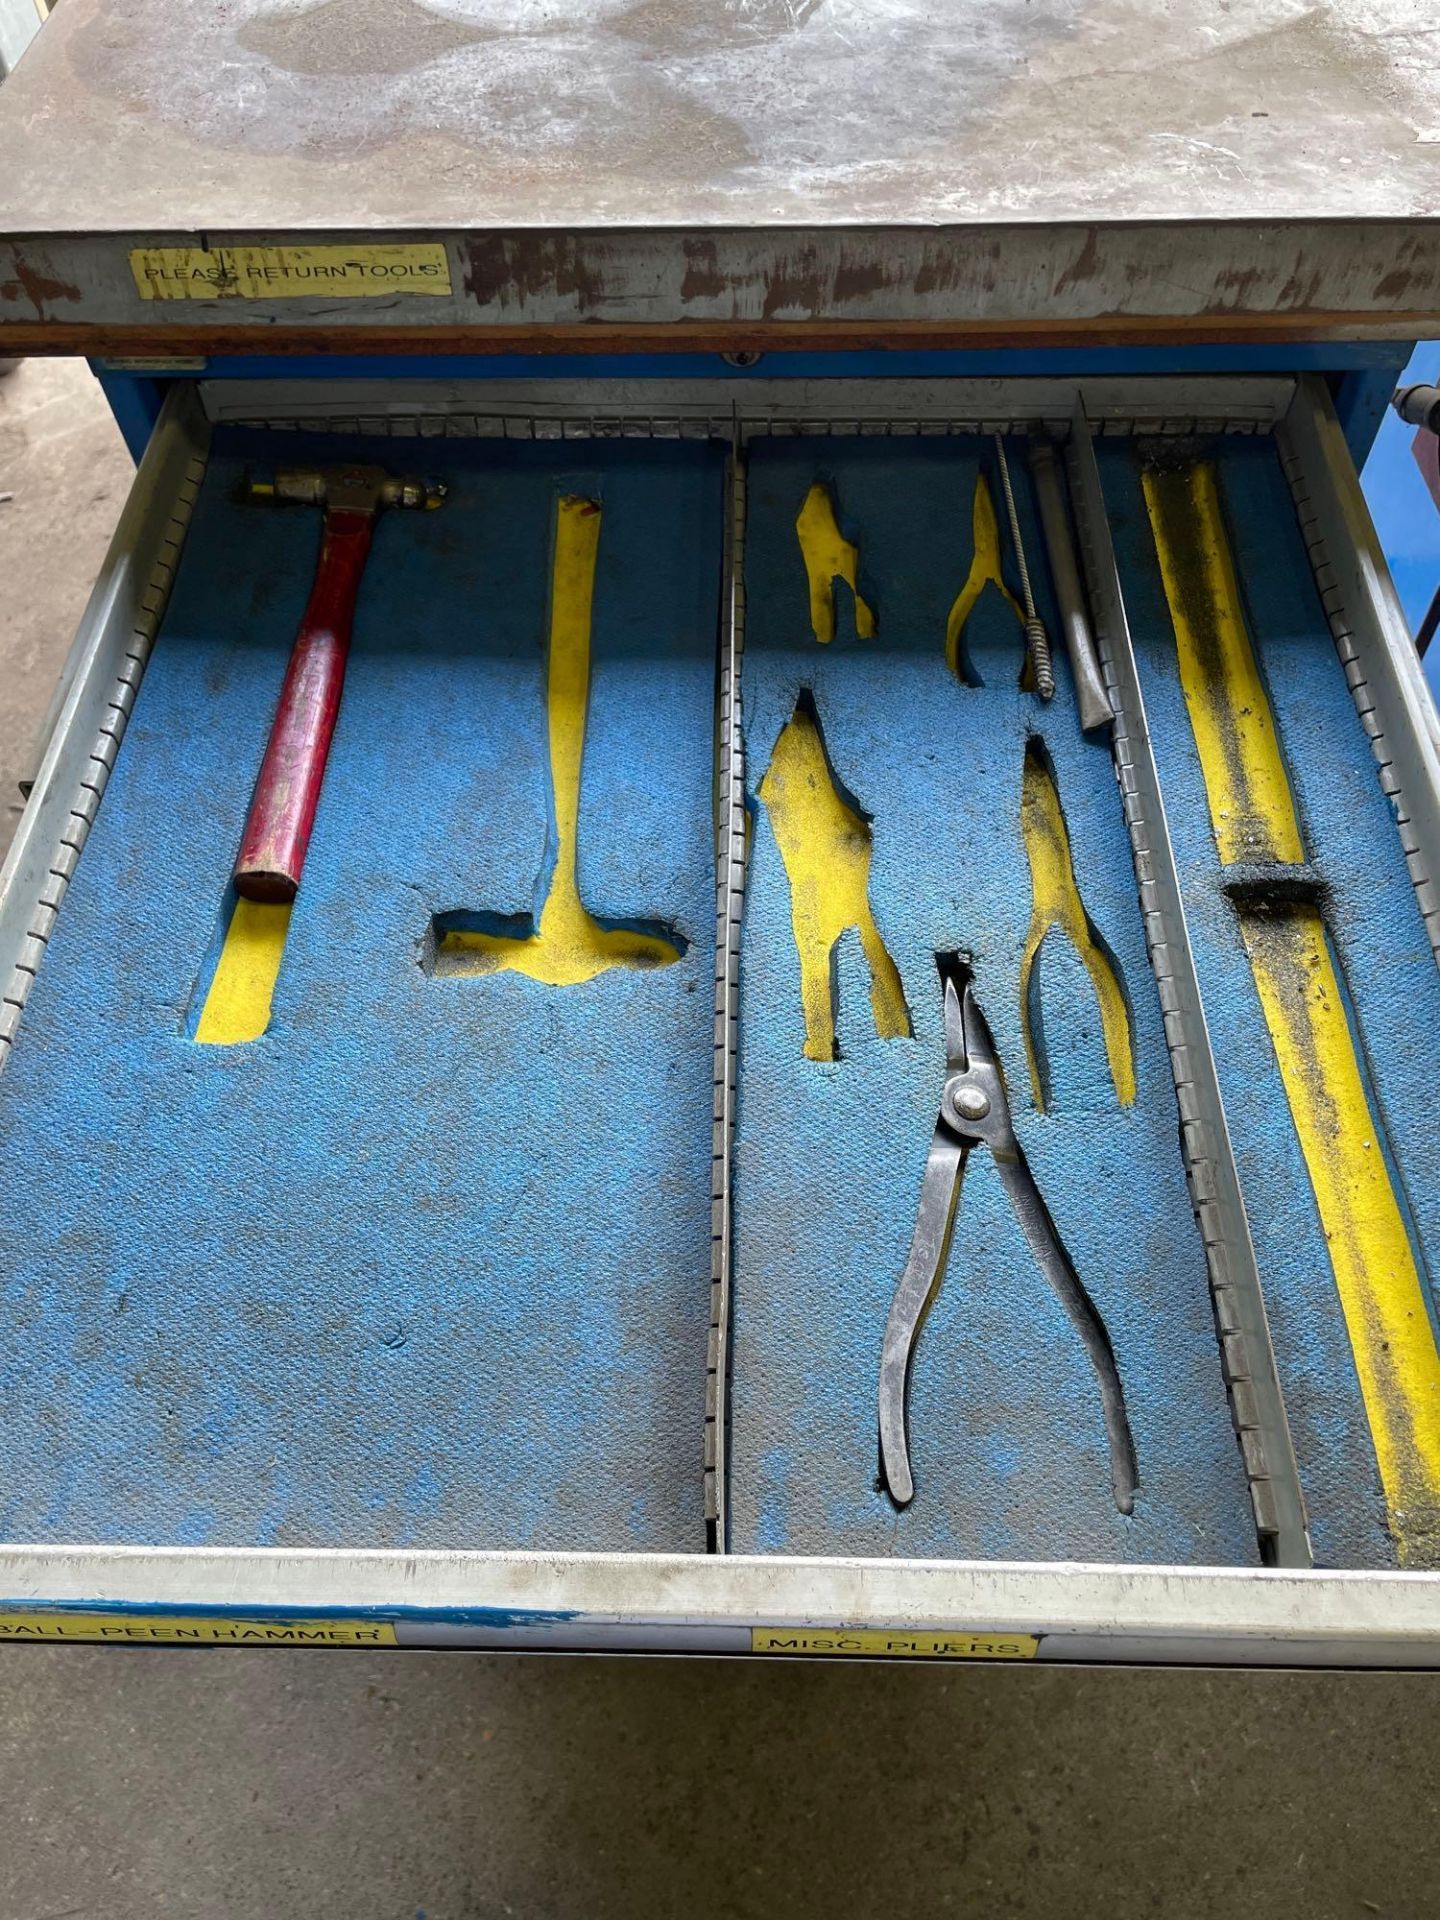 12 Drawer Work Table with Air Hose Reel on Base, with miscellaneous hand tools, taps, drill bits, Al - Image 6 of 32